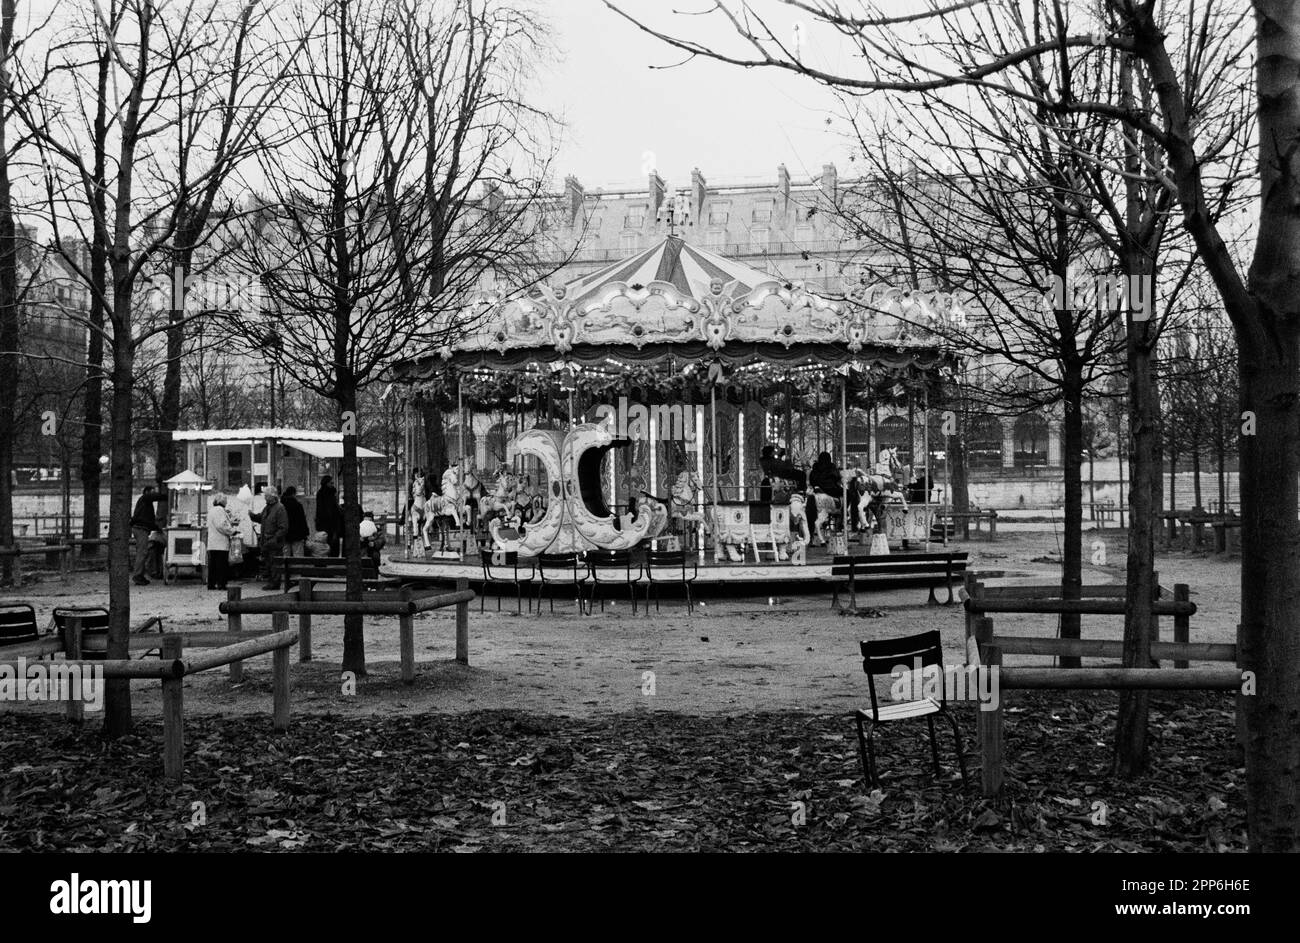 CHILDREN CAROUSEL IN THE JARDIN DES TUILERIES - PARIS FRANCE DURING WINTER SEASON - SILVER FILM © photography : Frederic BEAUMONT Stock Photo